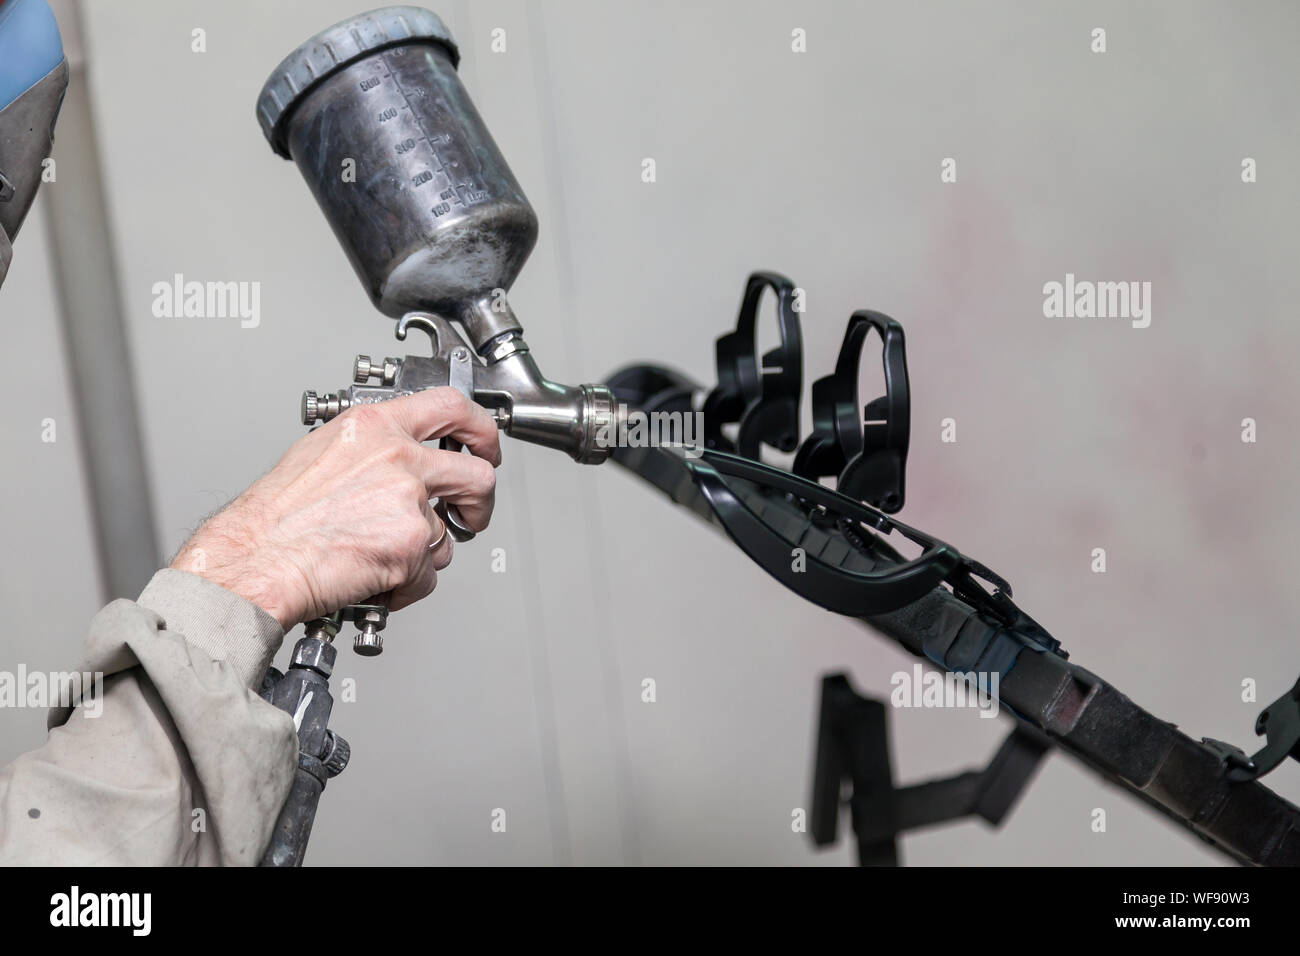 A Male Worker In Jumpsuit And Mask Paints With A Spray Gun A